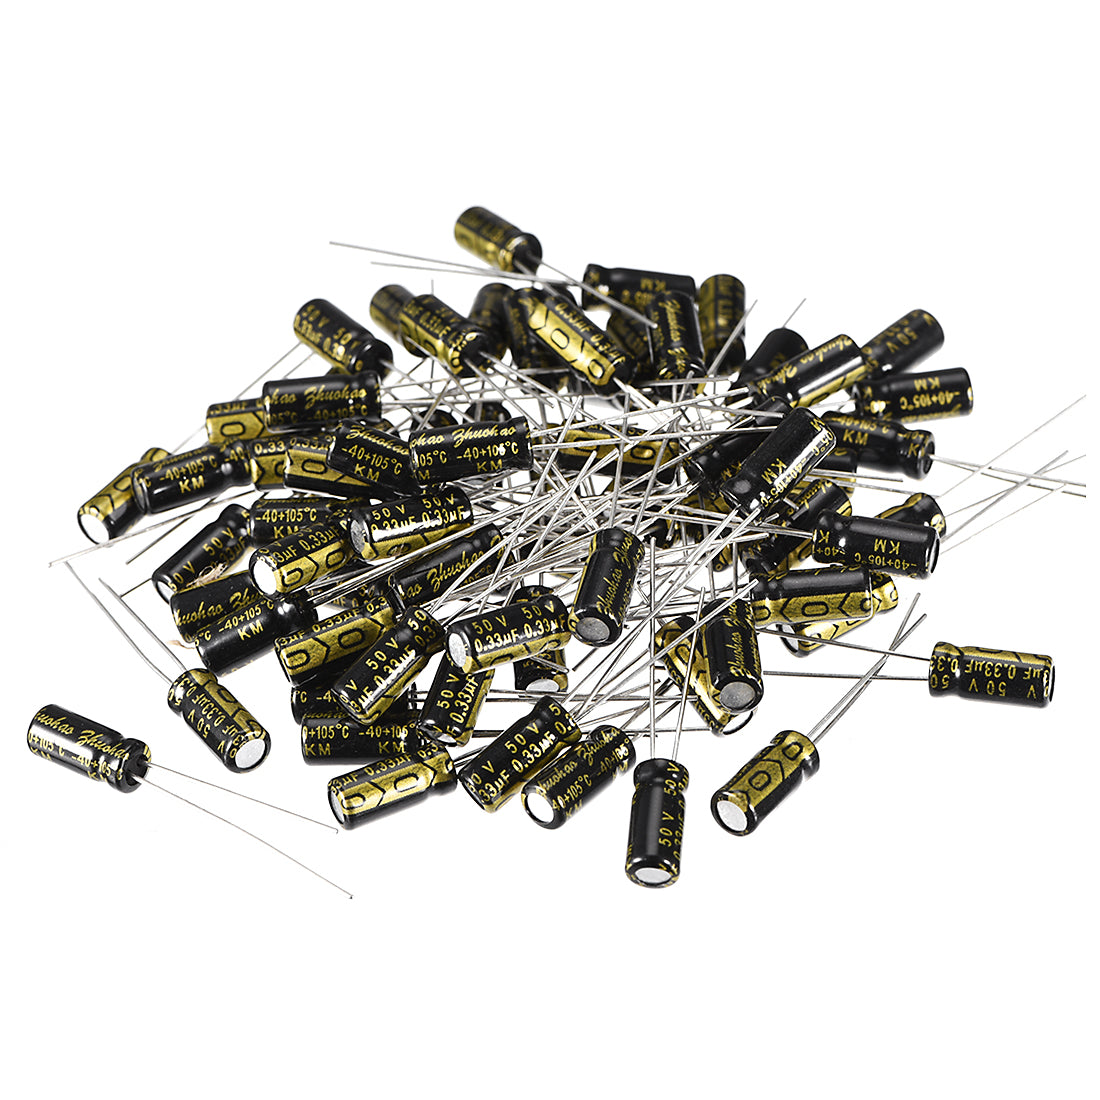 uxcell Uxcell Aluminum Radial Electrolytic Capacitor with 0.33uF 50V 105 Celsius Life 2000H 5 x 11 mm Black 80pcs